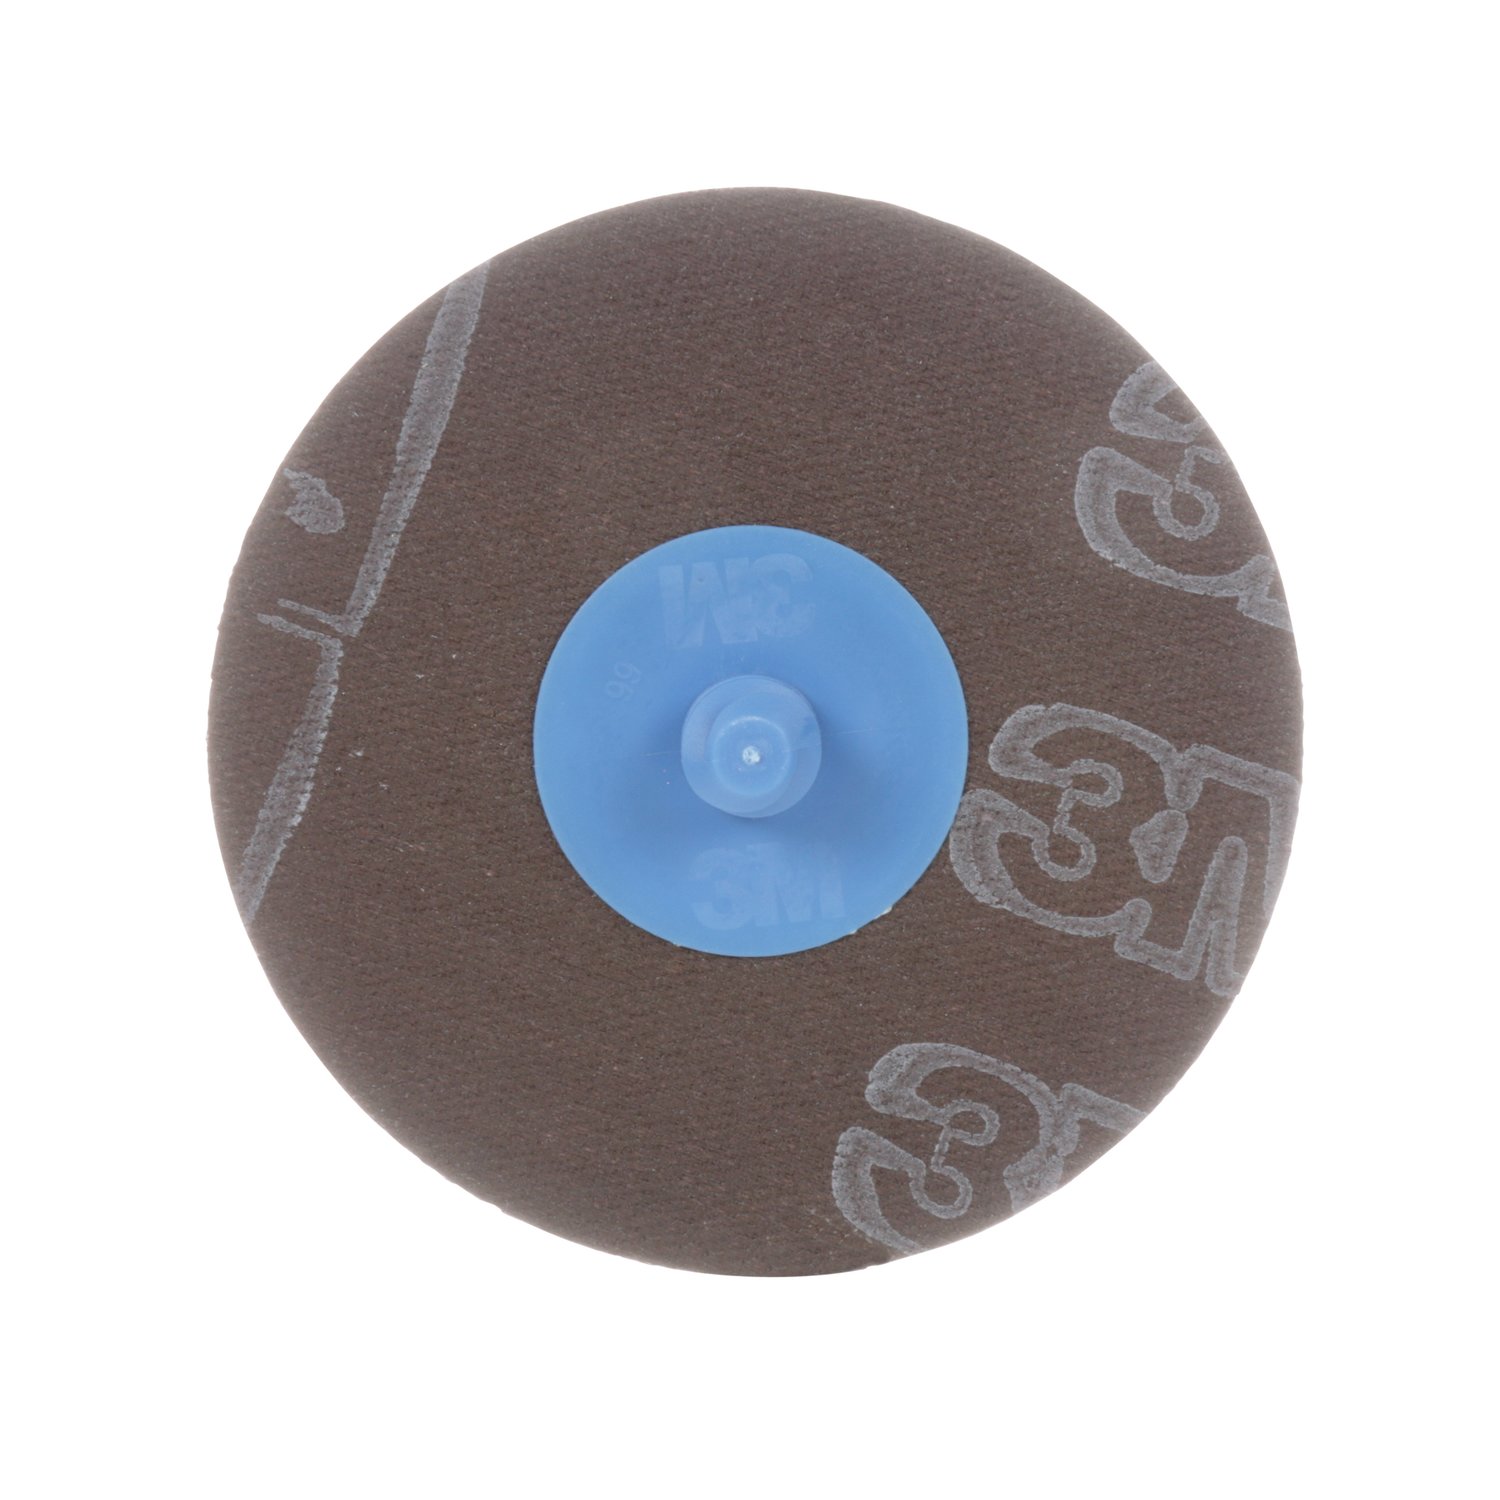 7010518157 - 3M Trizact Roloc Cloth Disc 237AA, A80 X-weight, TR, 1-1/2 in, Die
R150S